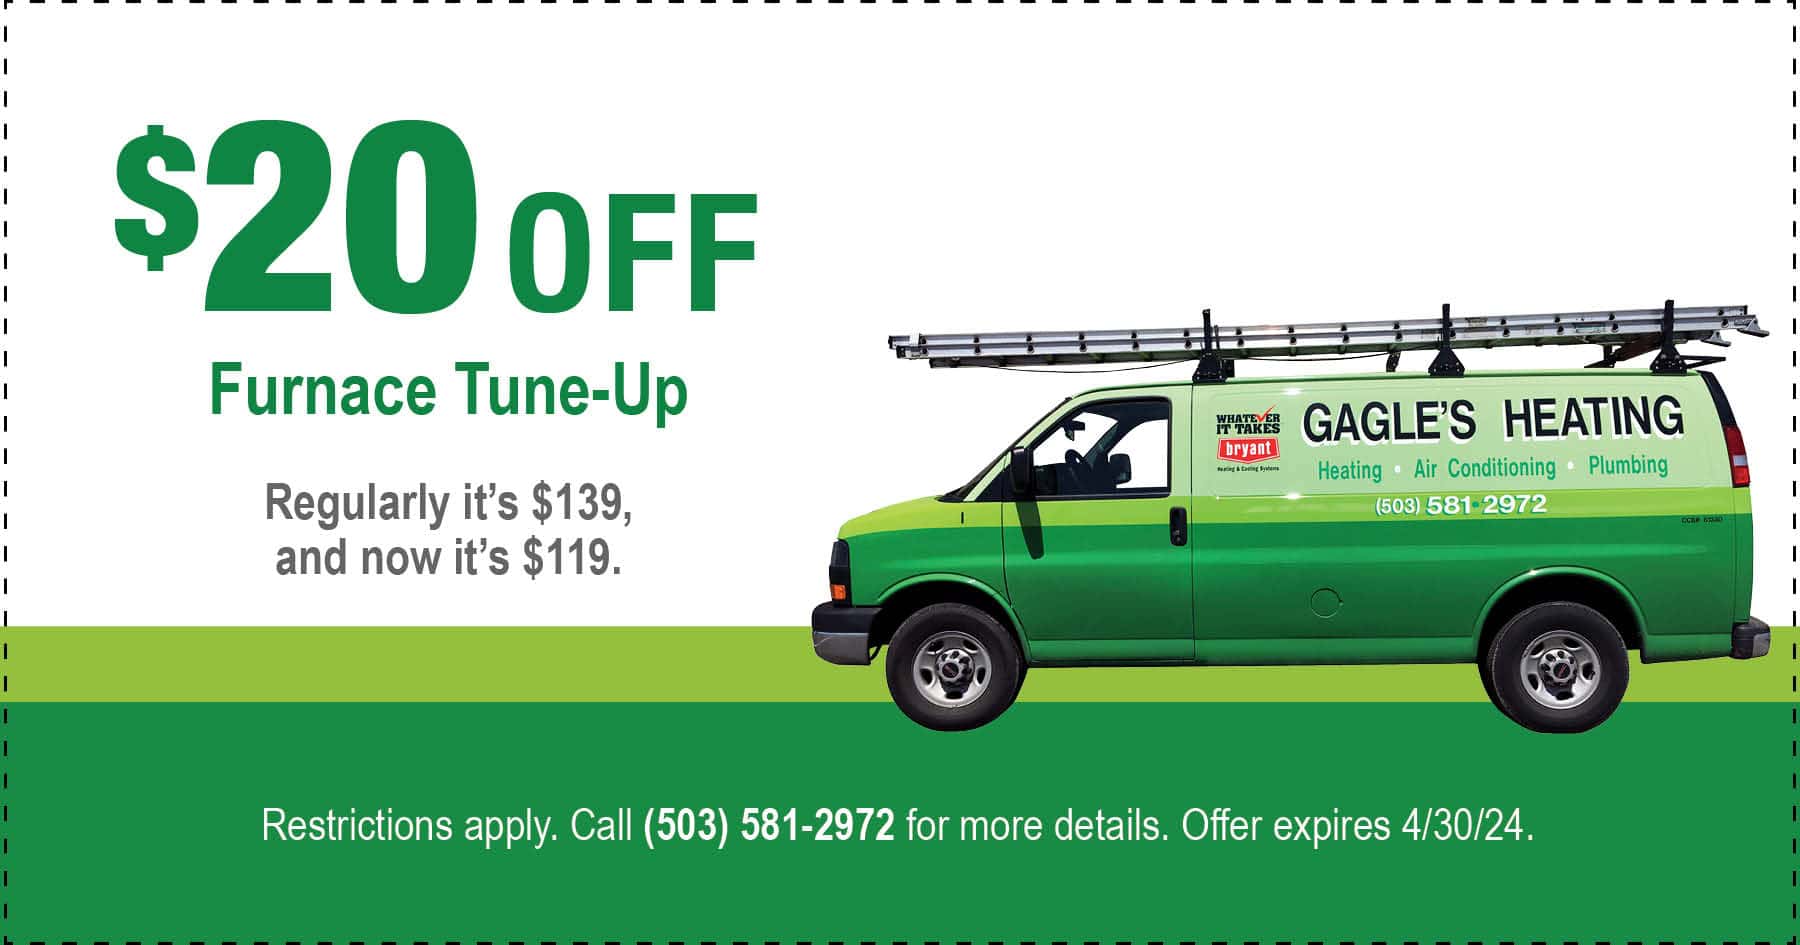 $20 off furnace tune up.